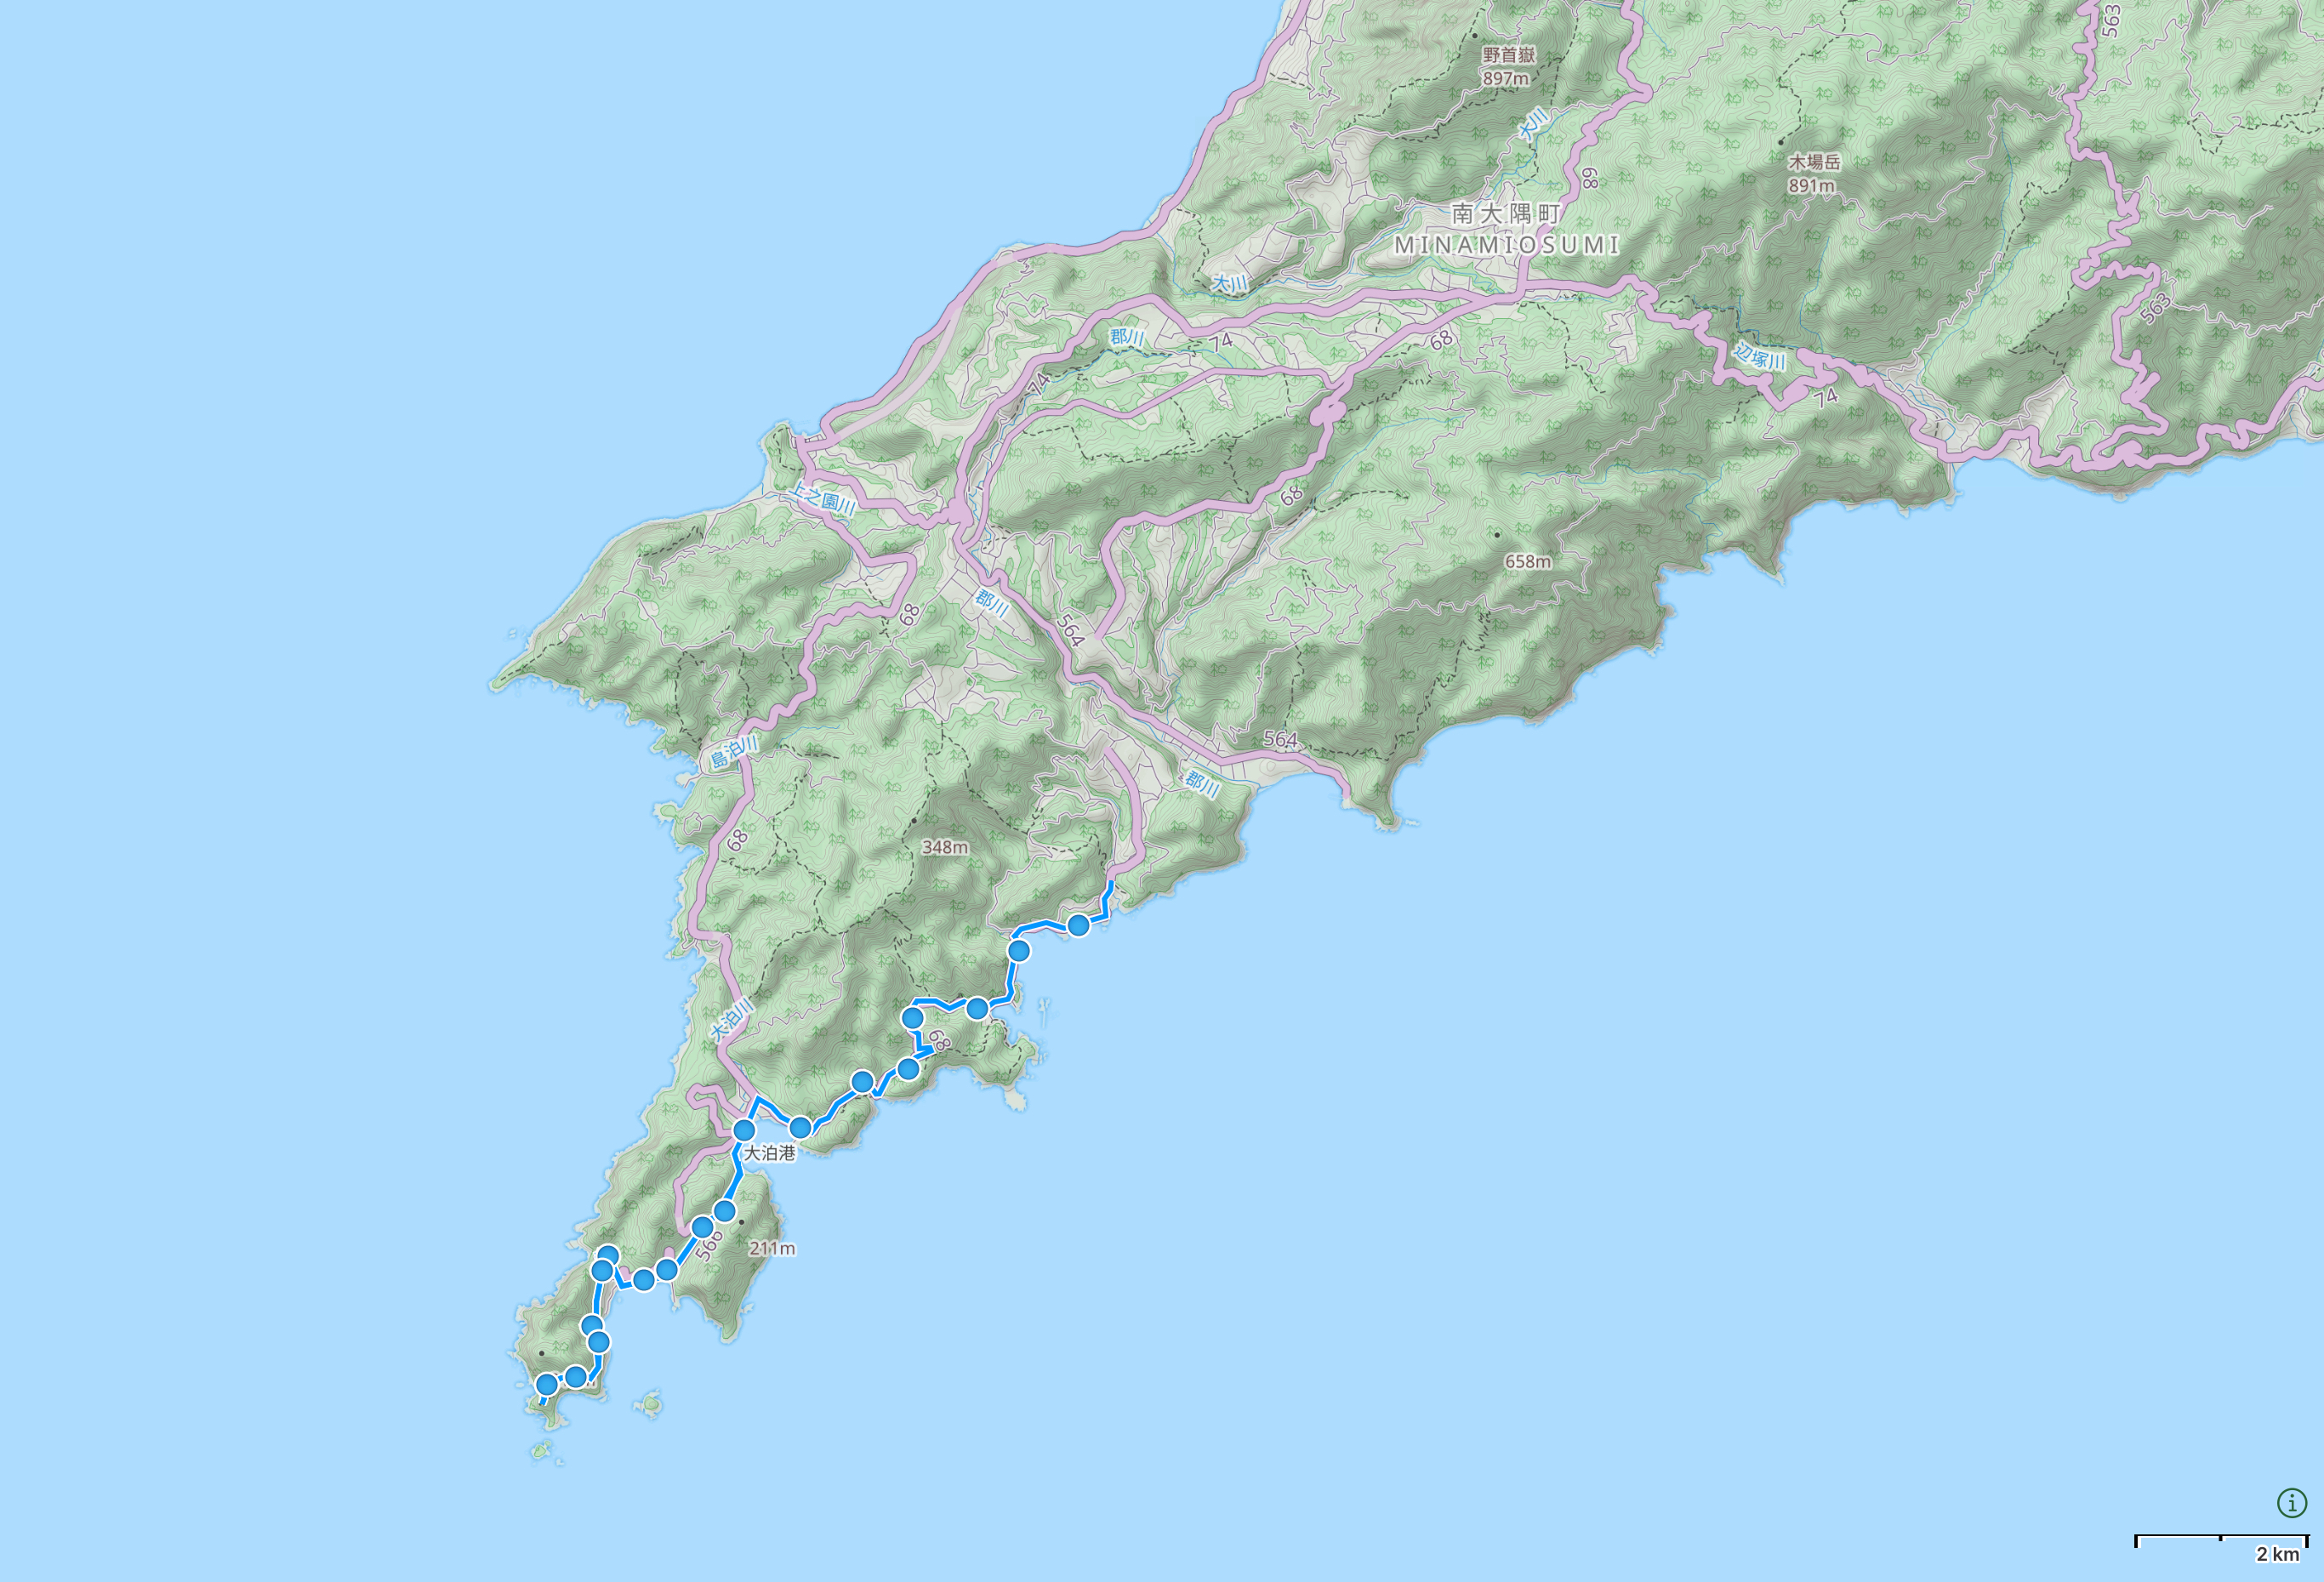 Map of Kagoshima Prefecture with author’s route from Sata to Cape Sata and back highlighted.